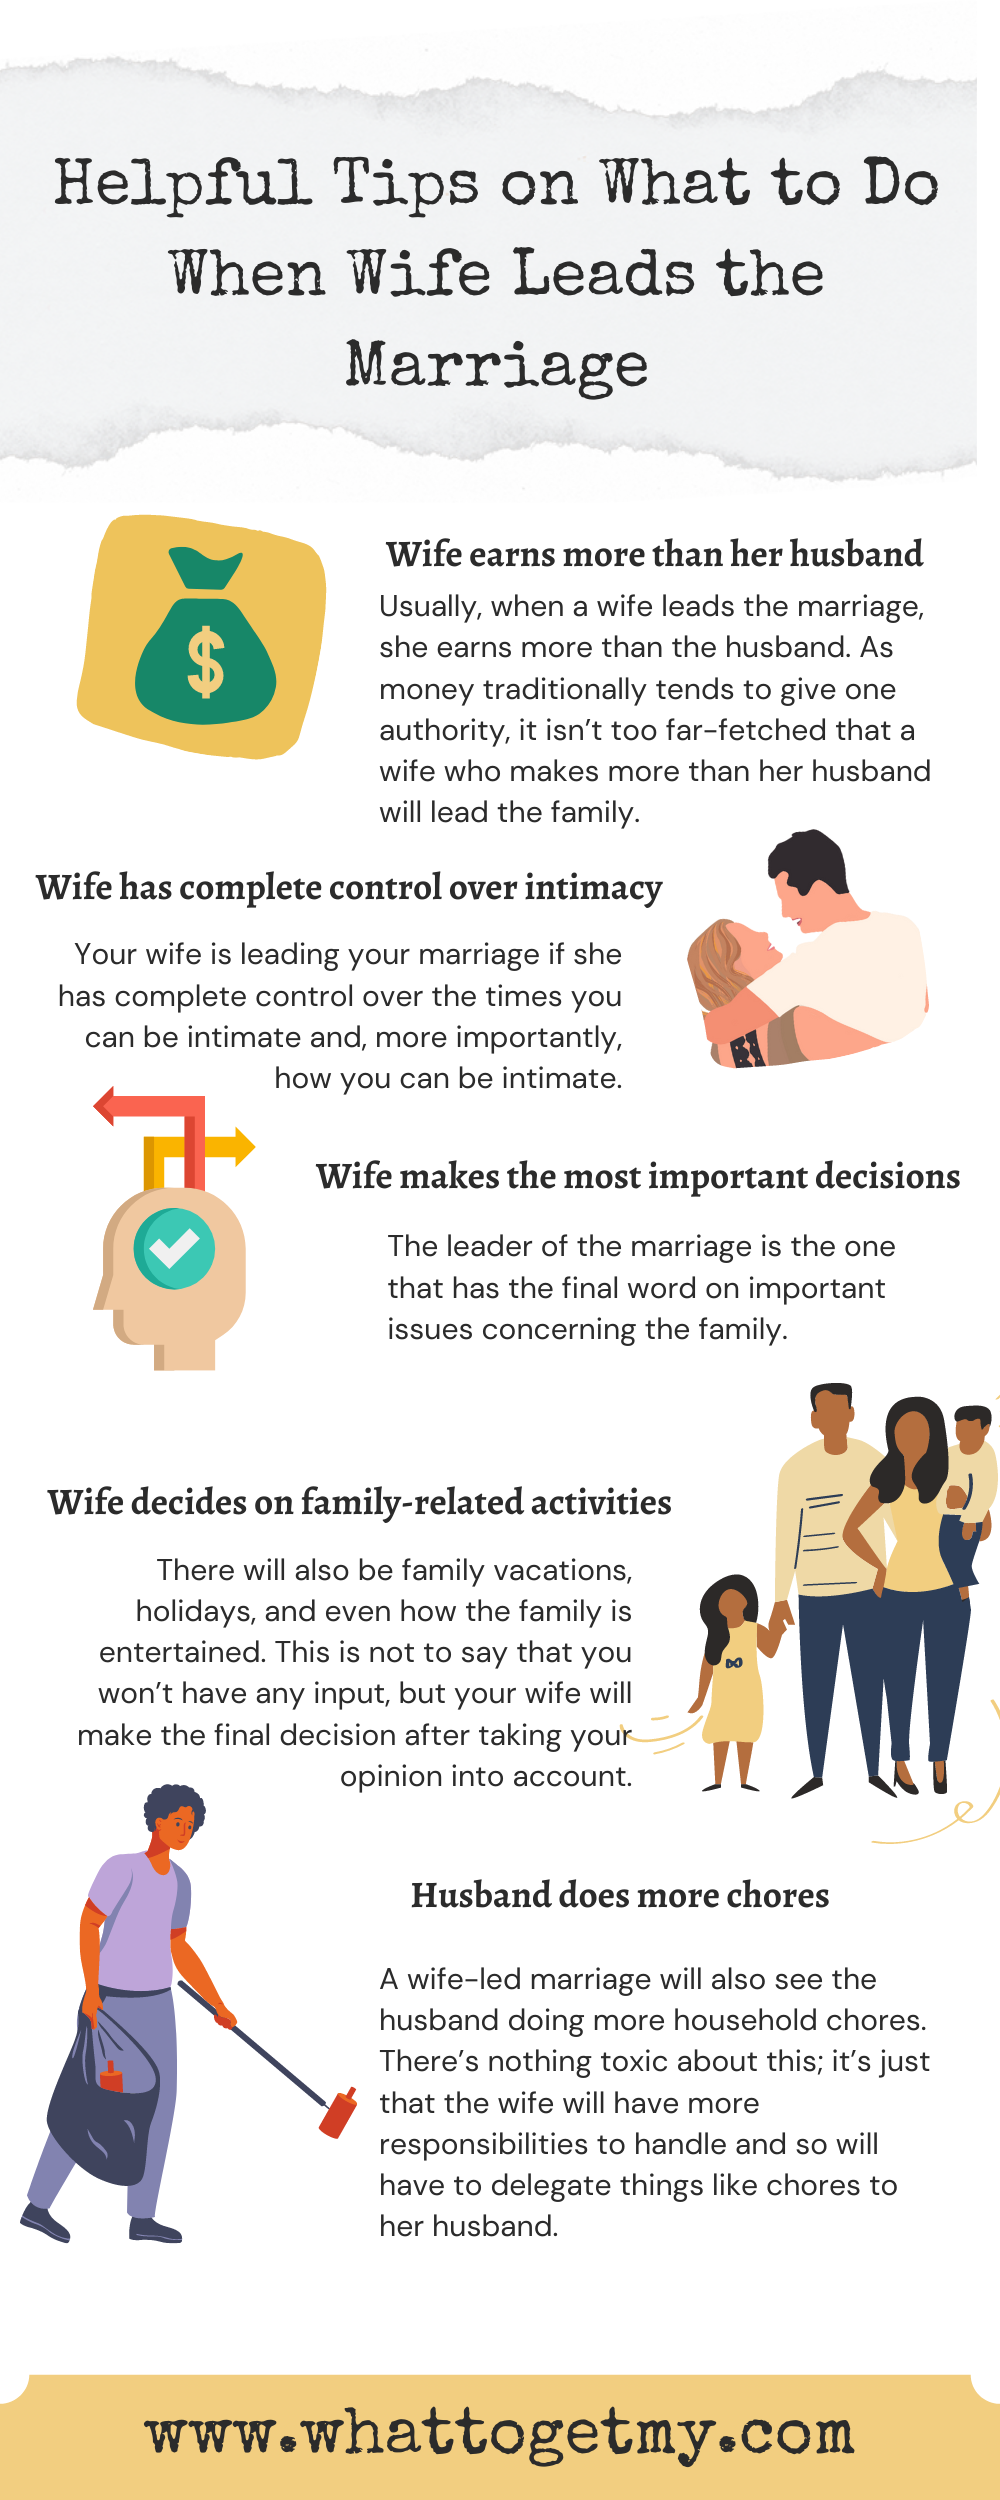 Helpful Tips on What to Do When Wife Leads the Marriage